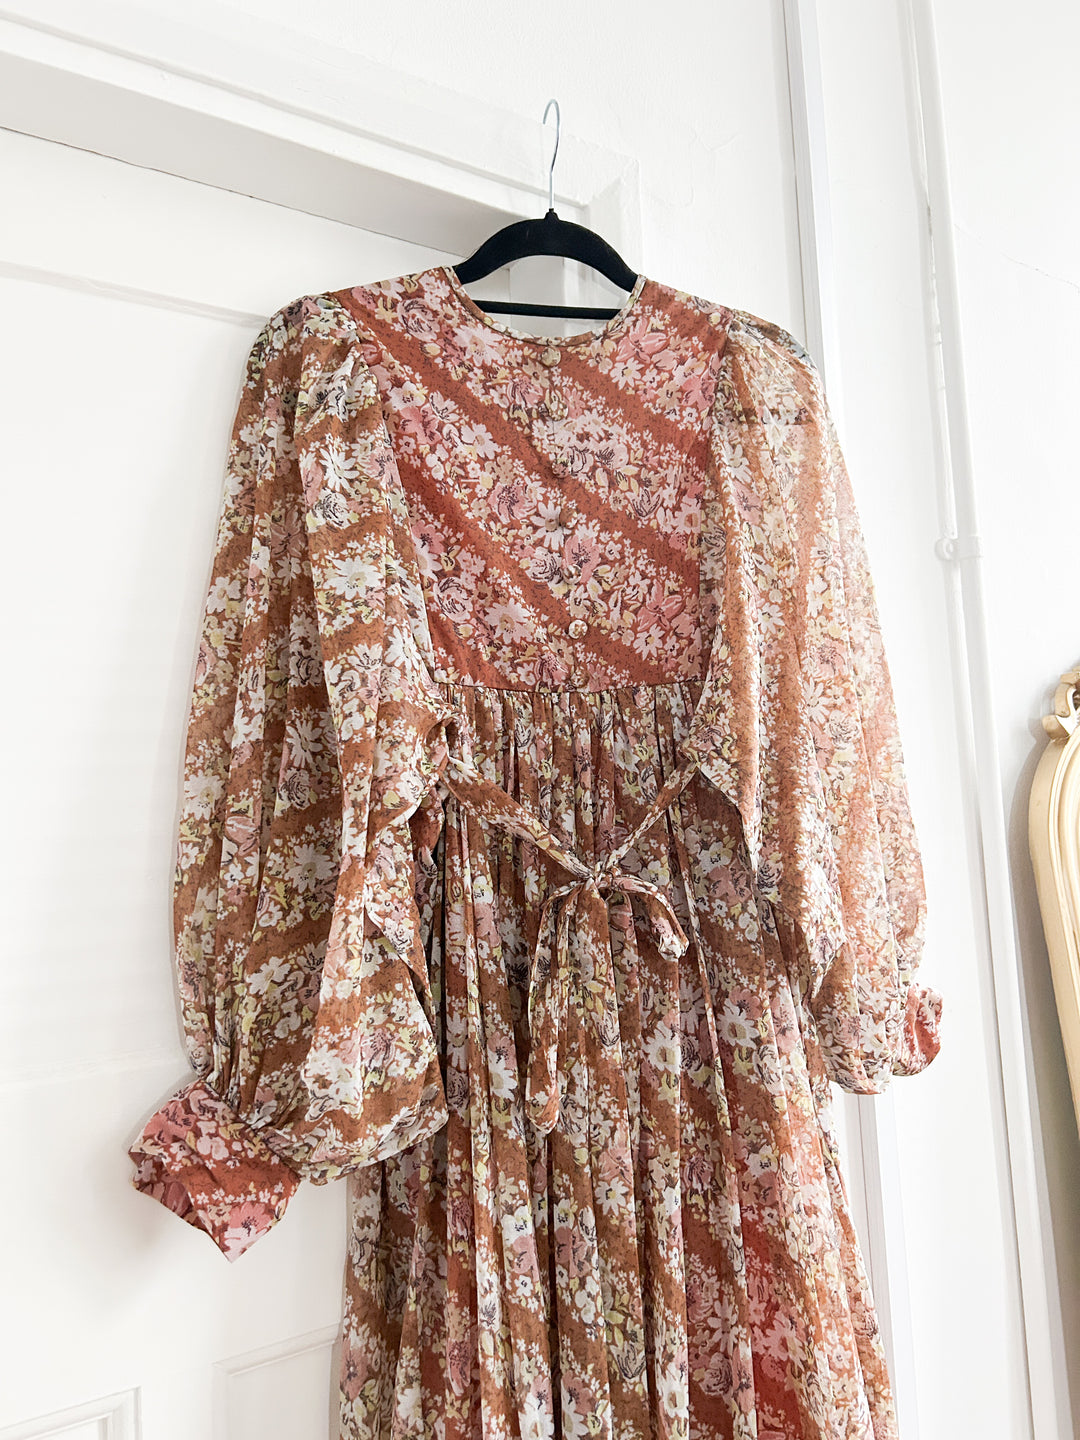 STUNNING 1970S BILLOWING SLEEVE FLORAL PRAIRIE DRESS APPROX UK SIZE 8/10/12